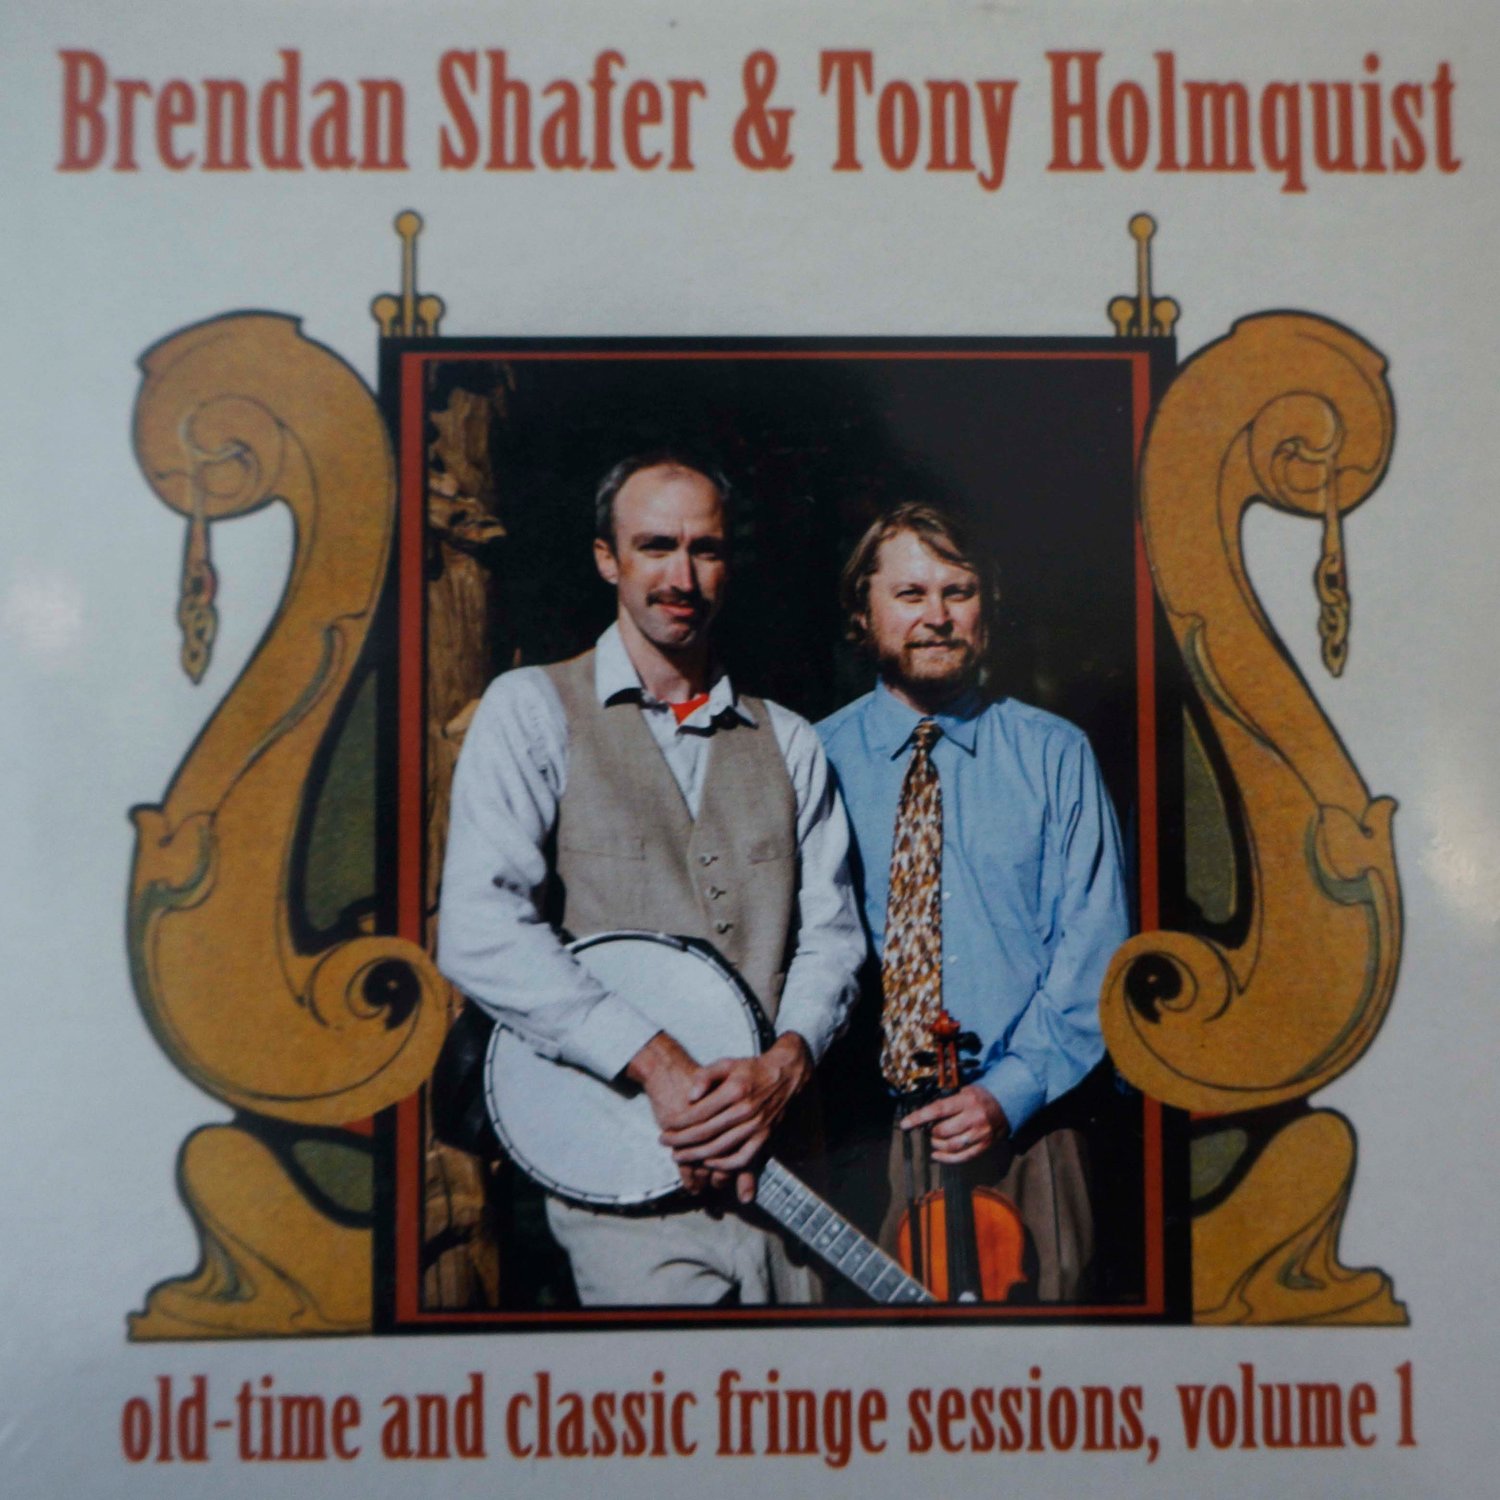 "Old-Time and Classic Fringe Sessions Volume 1" CD by Brendan Shafer & Tony Holmquist